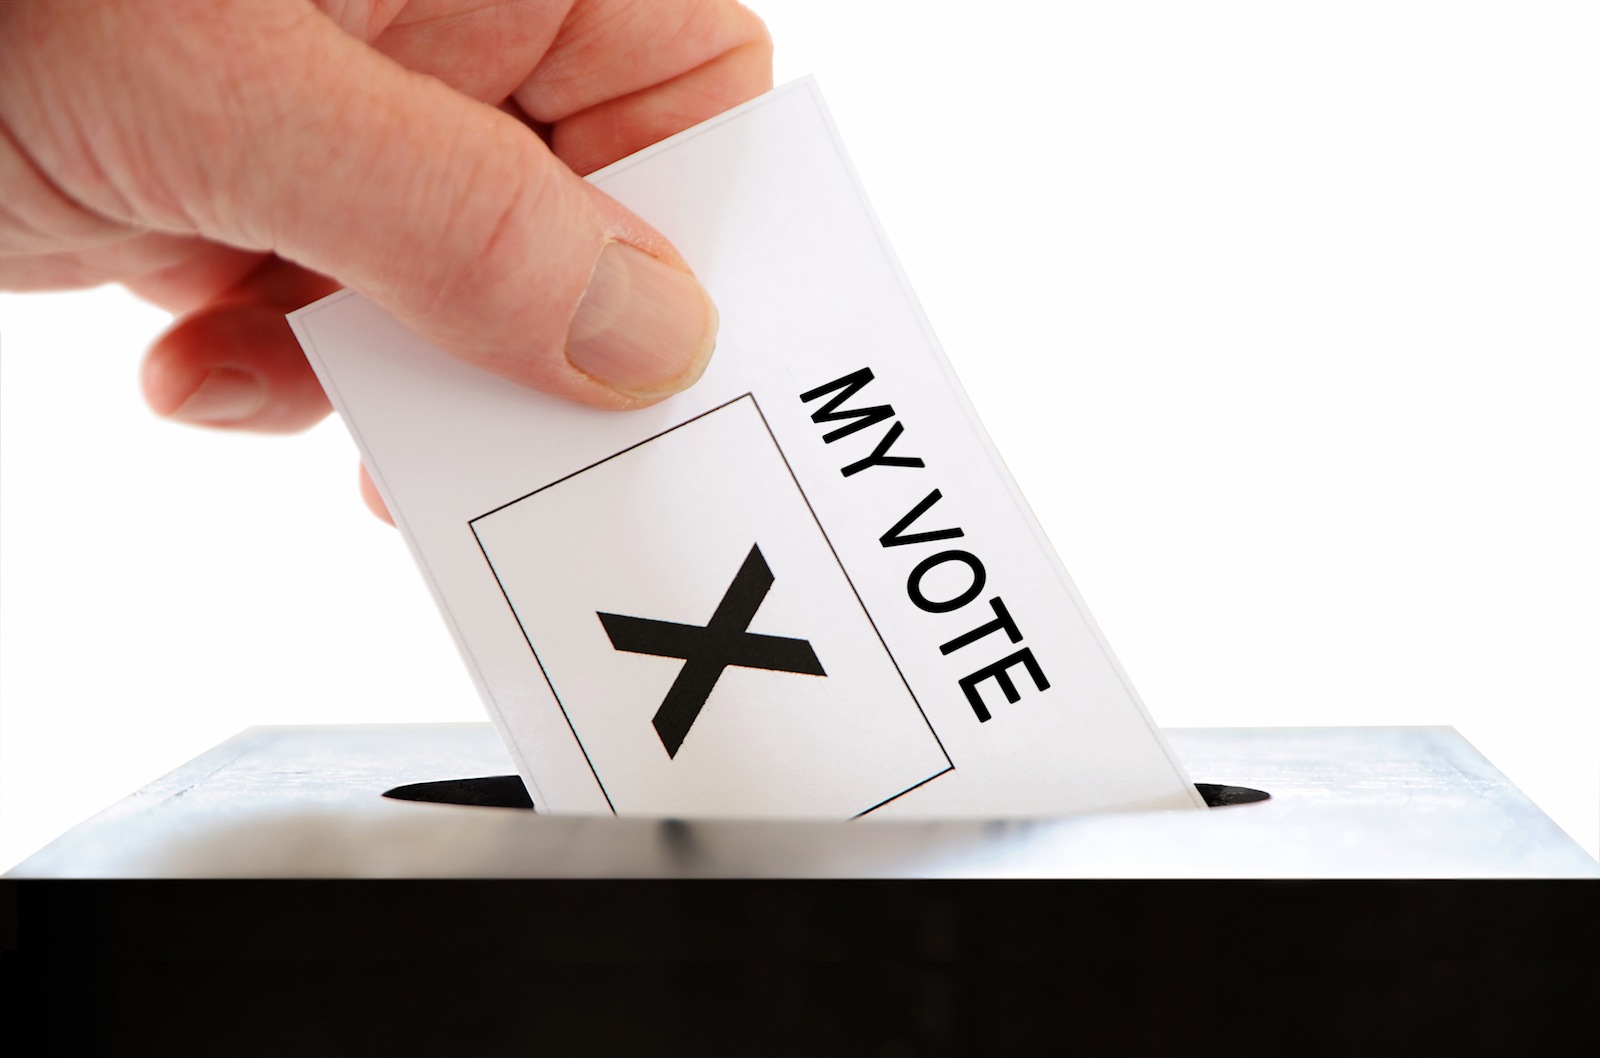 A hand placing a voting slip into a ballot box over a white background